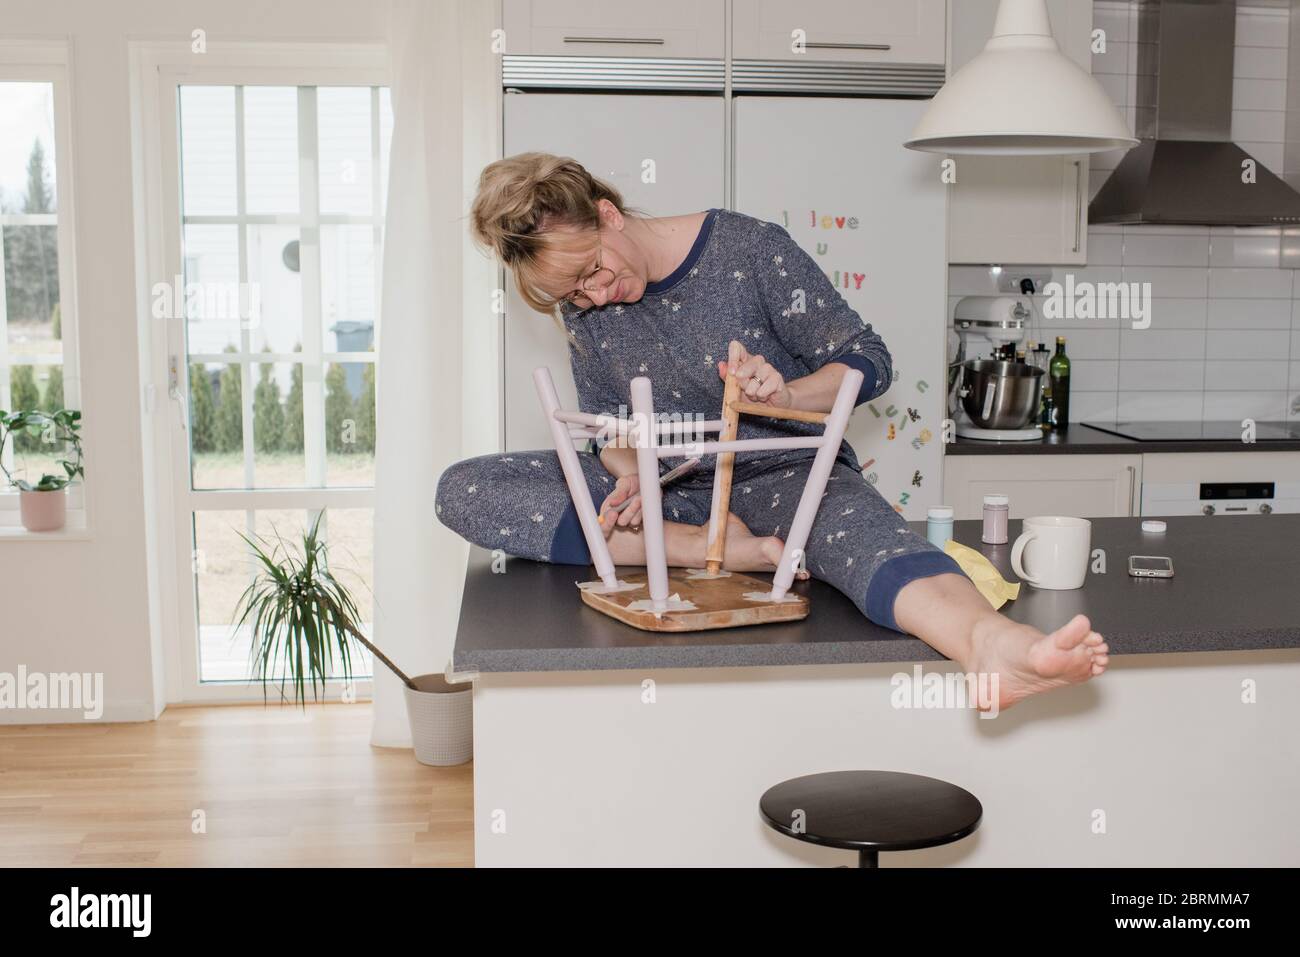 woman sat at home painting a stool in the kitchen Stock Photo